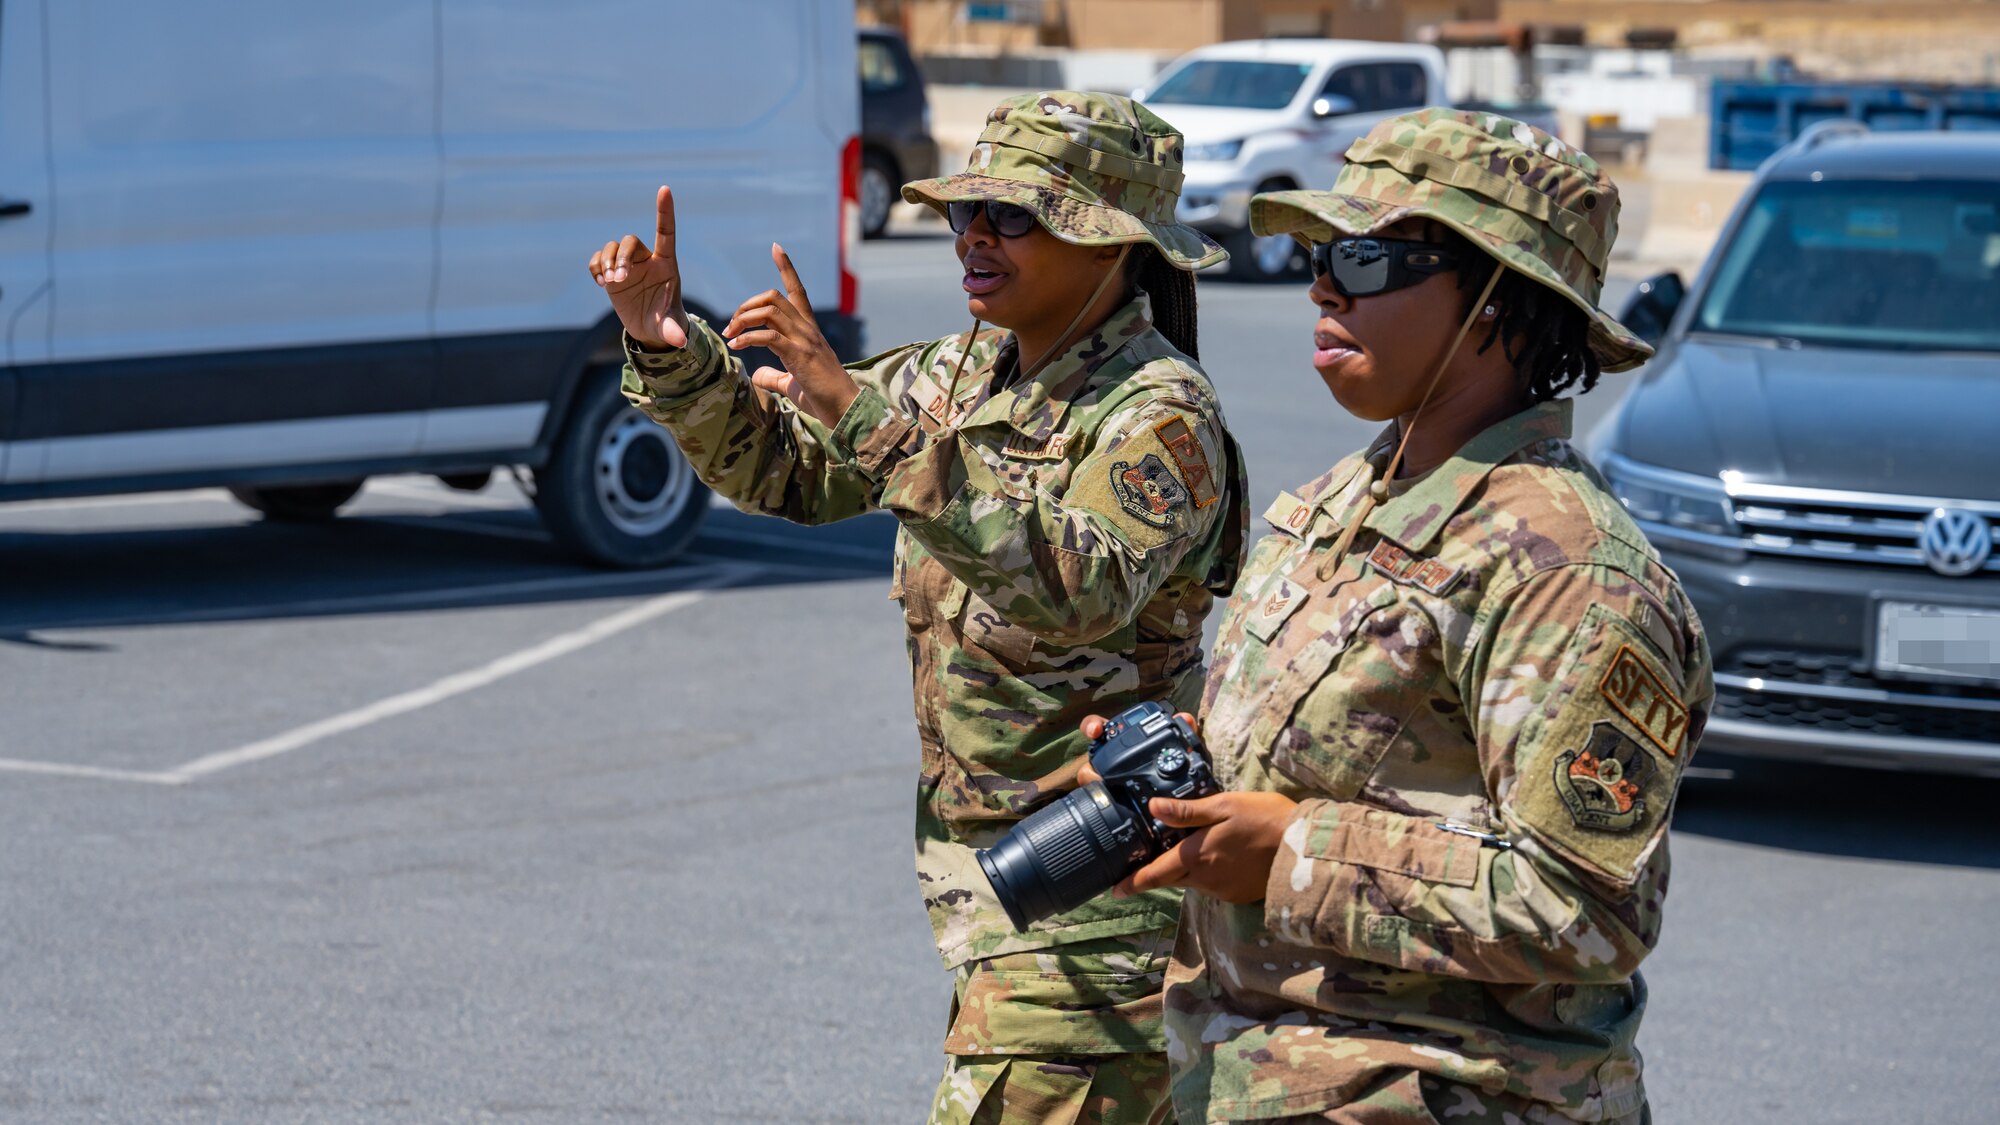 U.S. Air Force Staff Sgt. Breanna Diaz, 386th Air Expeditionary Wing public affairs specialist (left), teaches photo composition techniques to an Airman from the 386th AEW safety office during alert photography training at Ali Al Salem Air Base, Kuwait, June 21, 2023. The 386th AEW safety team attended the training to learn what goes into alert photography, and how it assists with a variety of scenarios and investigations.